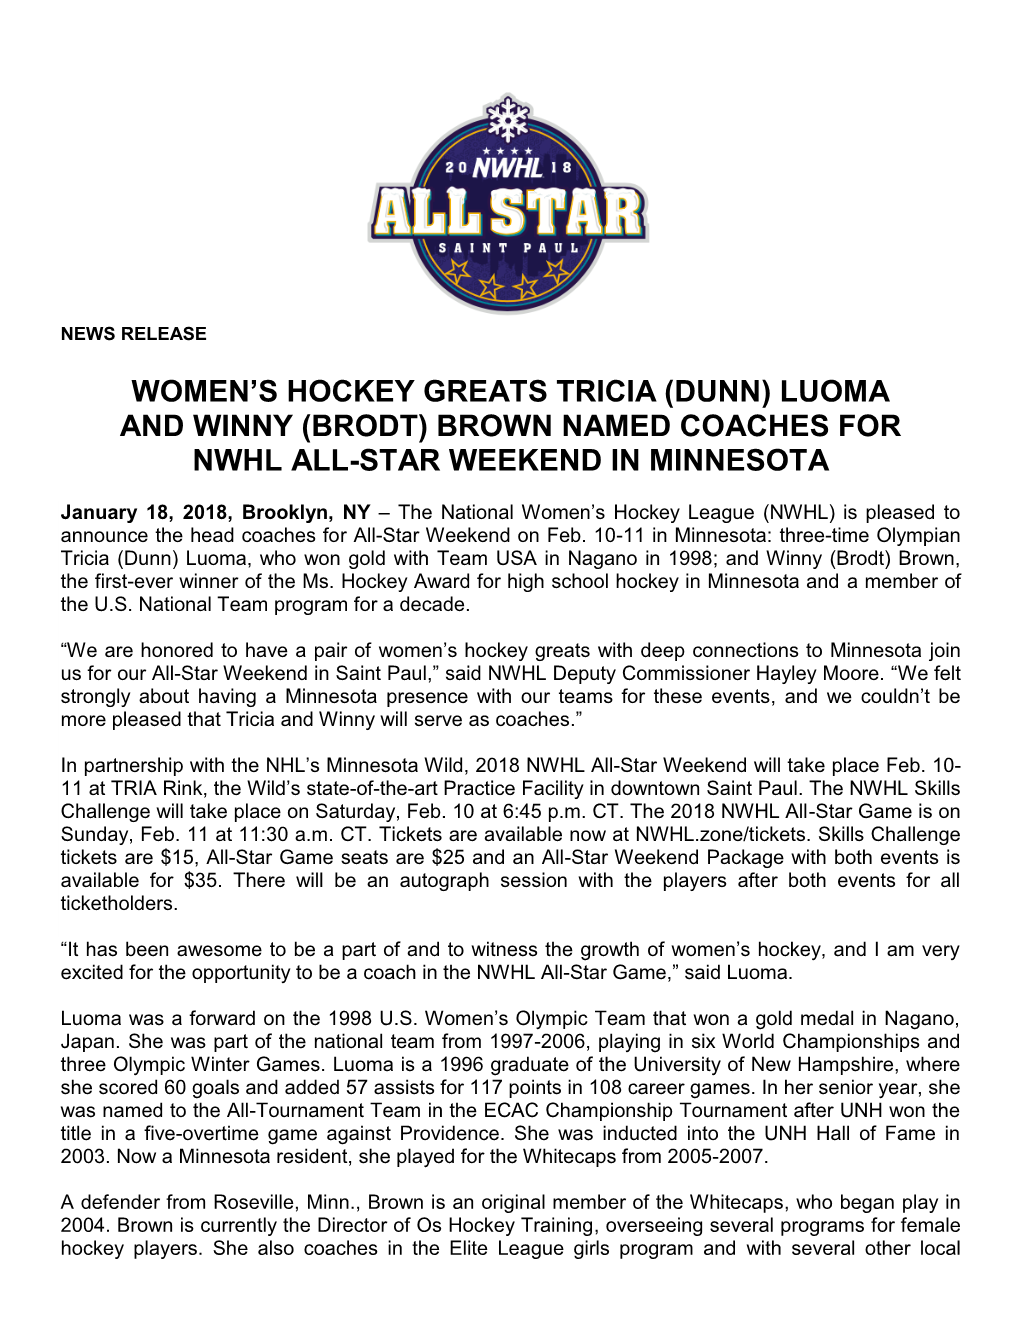 Women's Hockey Greats Tricia (Dunn) Luoma and Winny (Brodt) Brown Named Coaches for Nwhl All-Star Weekend in Minnesota